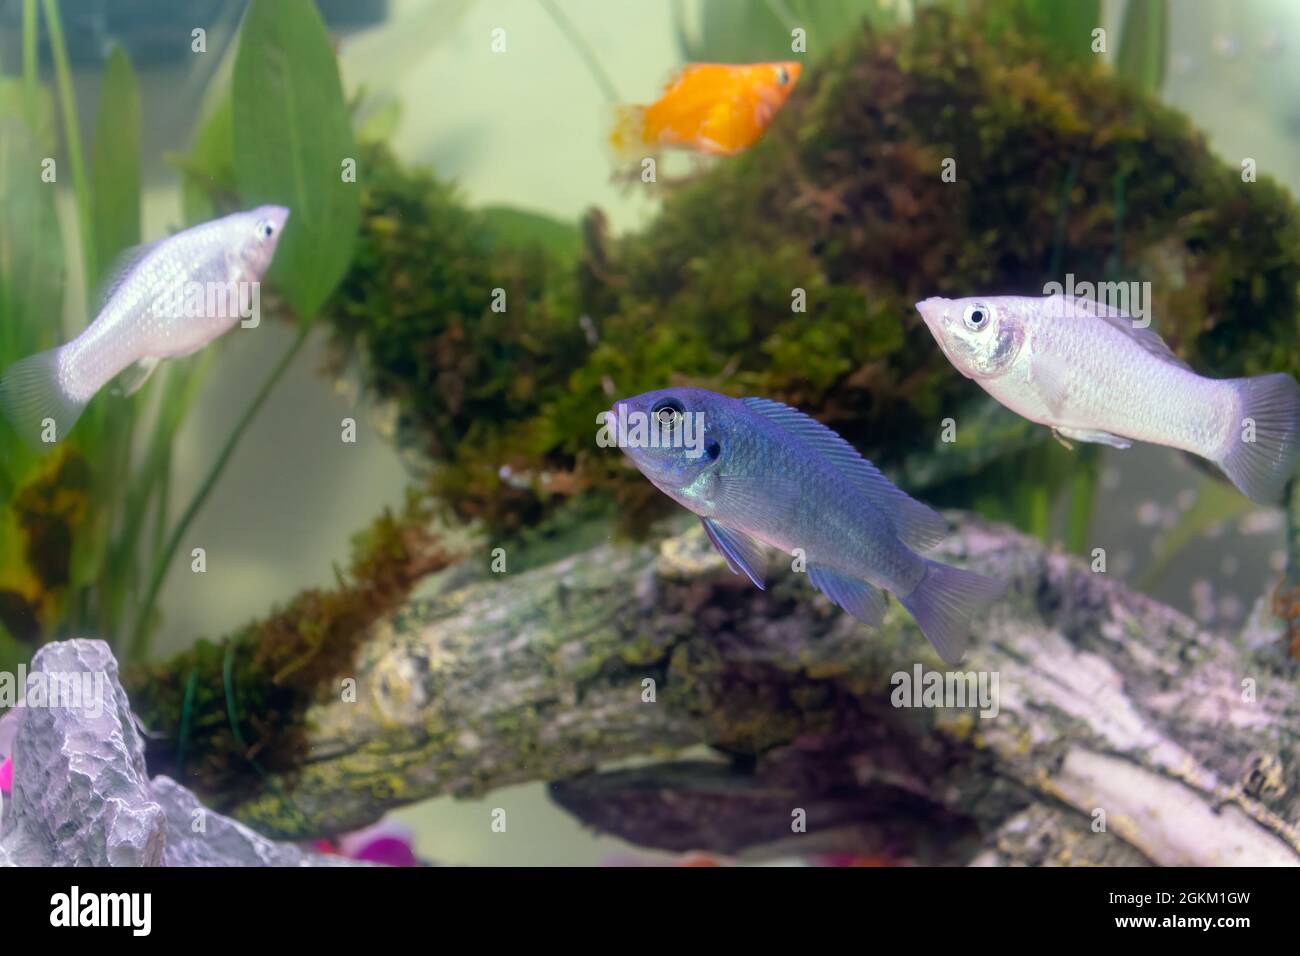 Small African Malawi Cichlid fish in a home aquarium Stock Photo